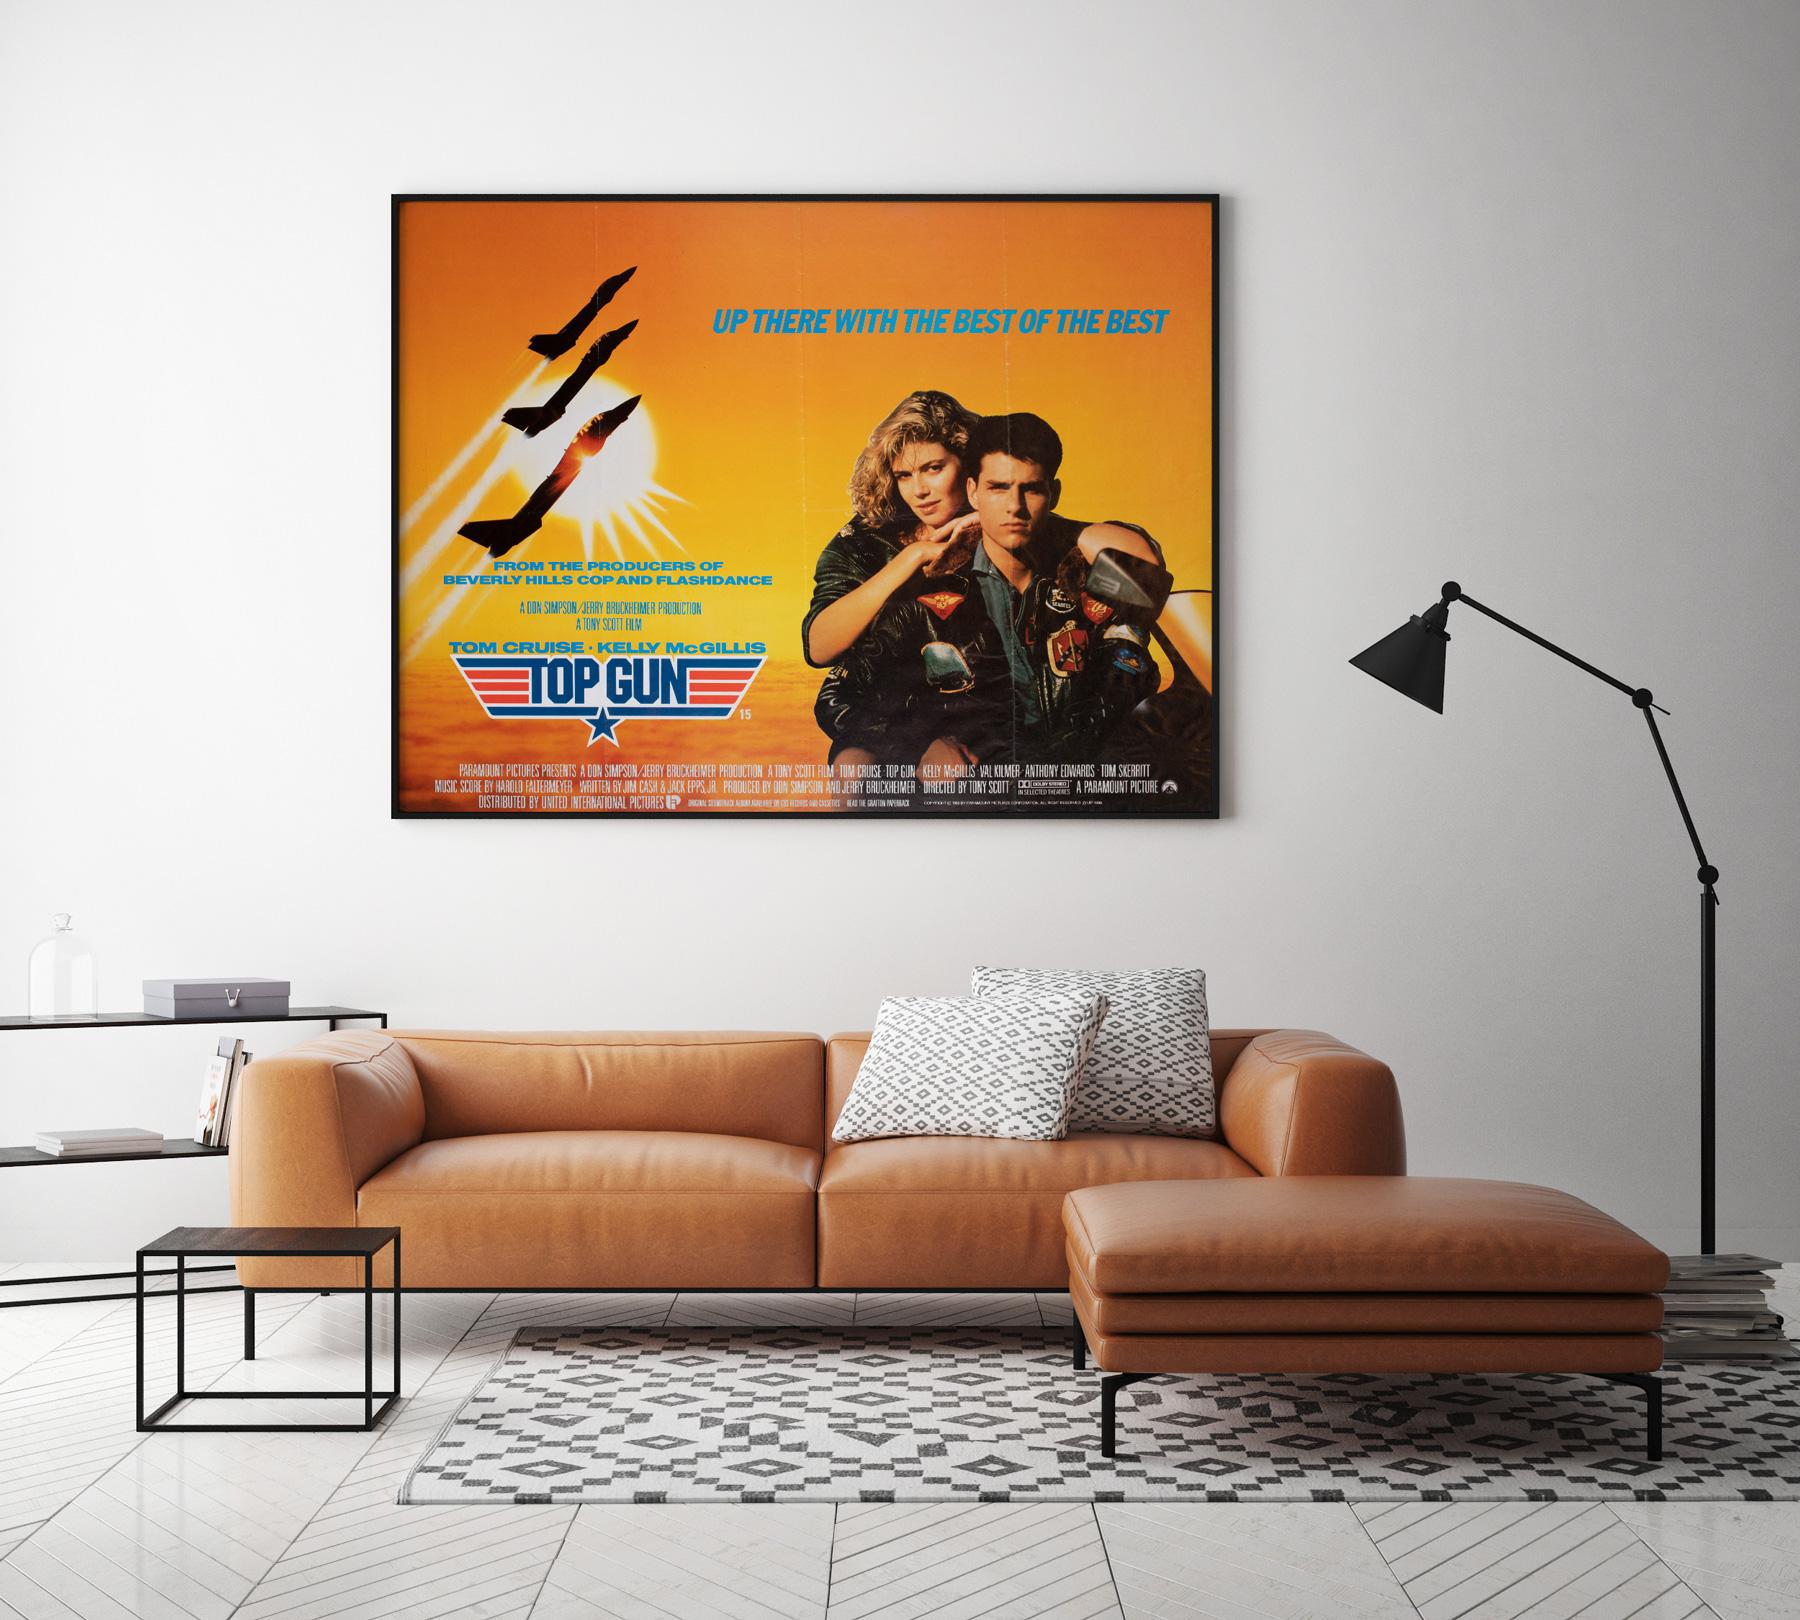 Fantastic first-year-of-release British UK Quad film poster for 80s classic Top Gun. A perfect present for the Maverick (or Goose) in your life. This poster is up there with the best of the best for the title!

This vintage movie poster is sized